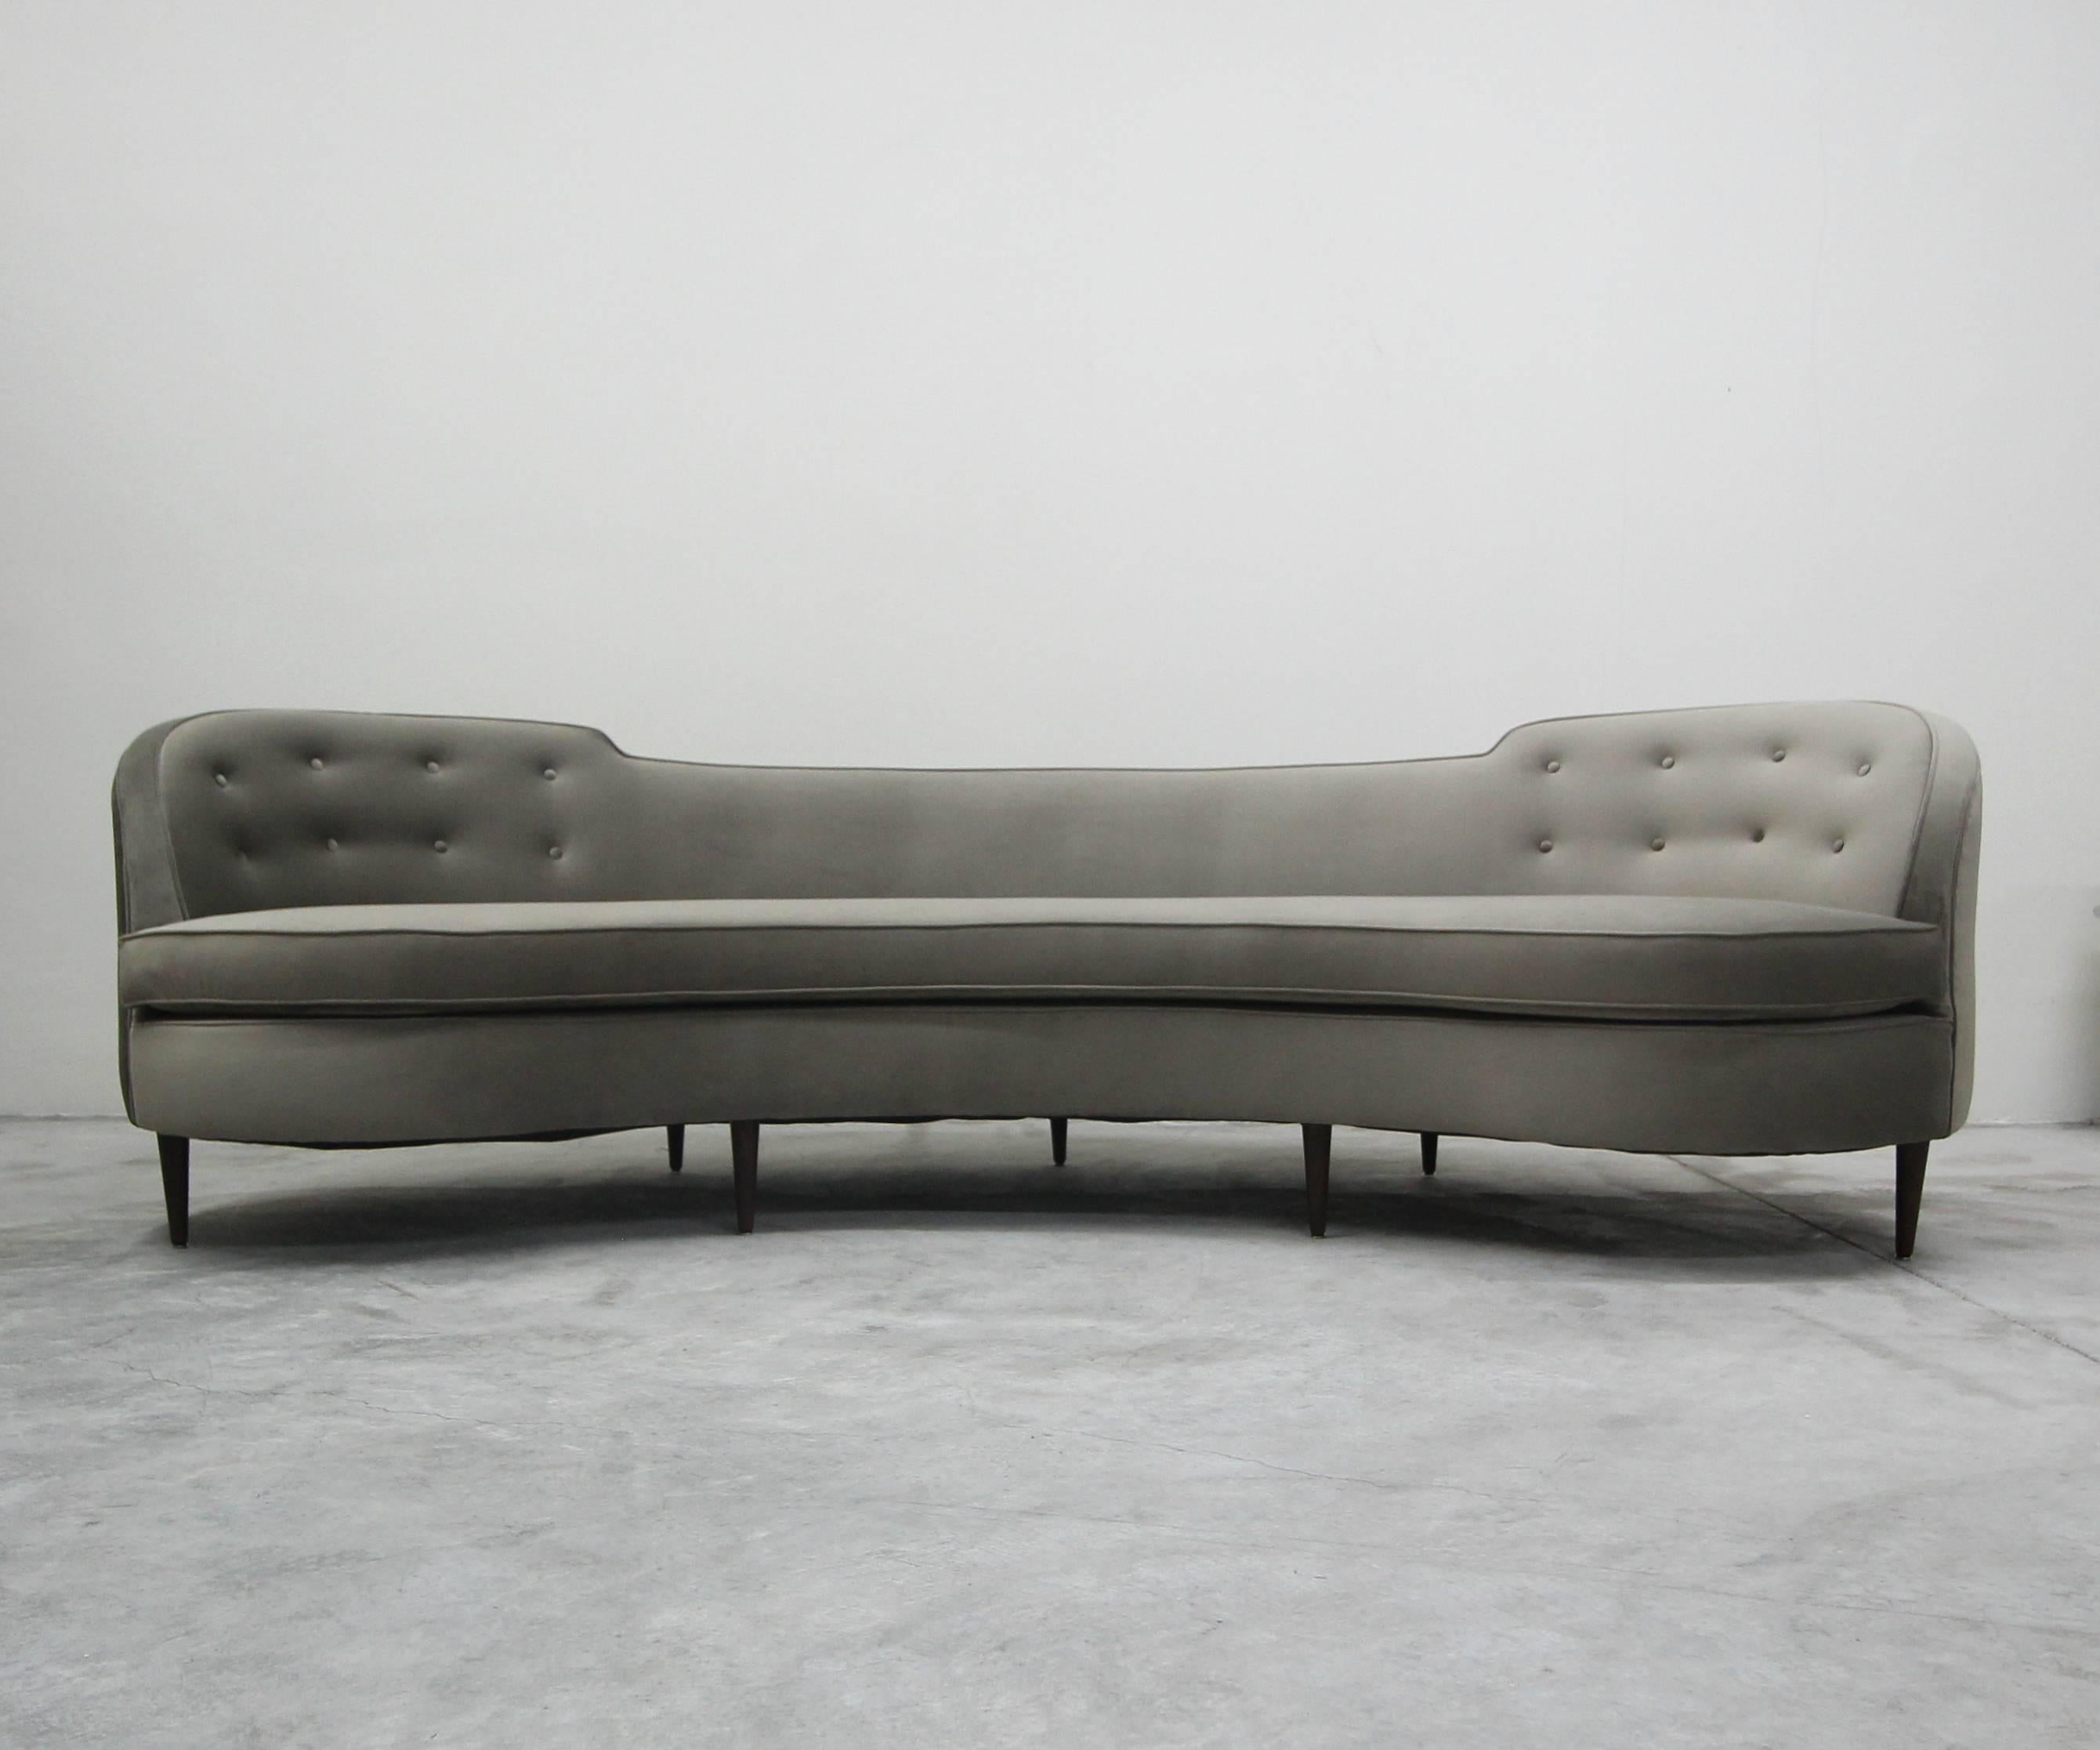 Mid-Century Modern Authentic Early Midcentury Oasis Sofa by Edward Wormley for Dunbar